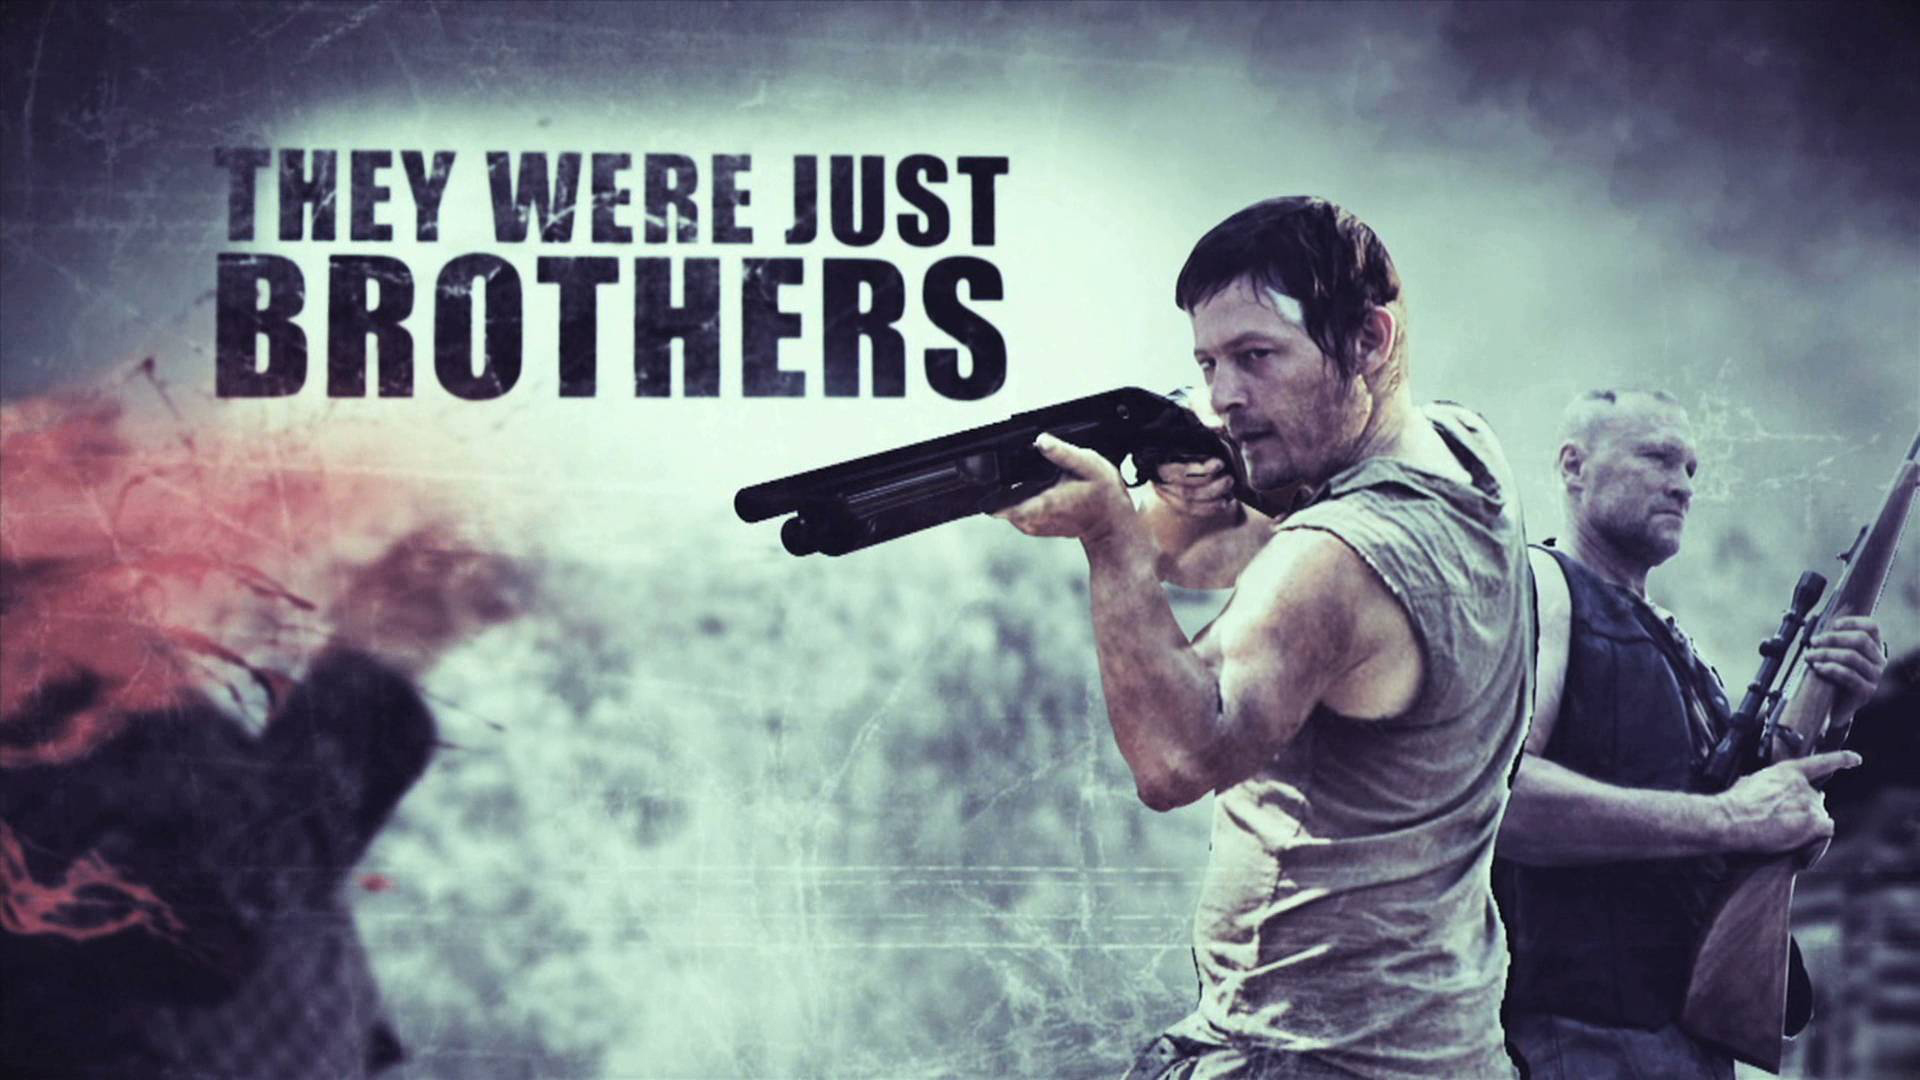 The Walking Dead Wallpaper - Dixon Brothers The Walking Dead - HD Wallpaper 